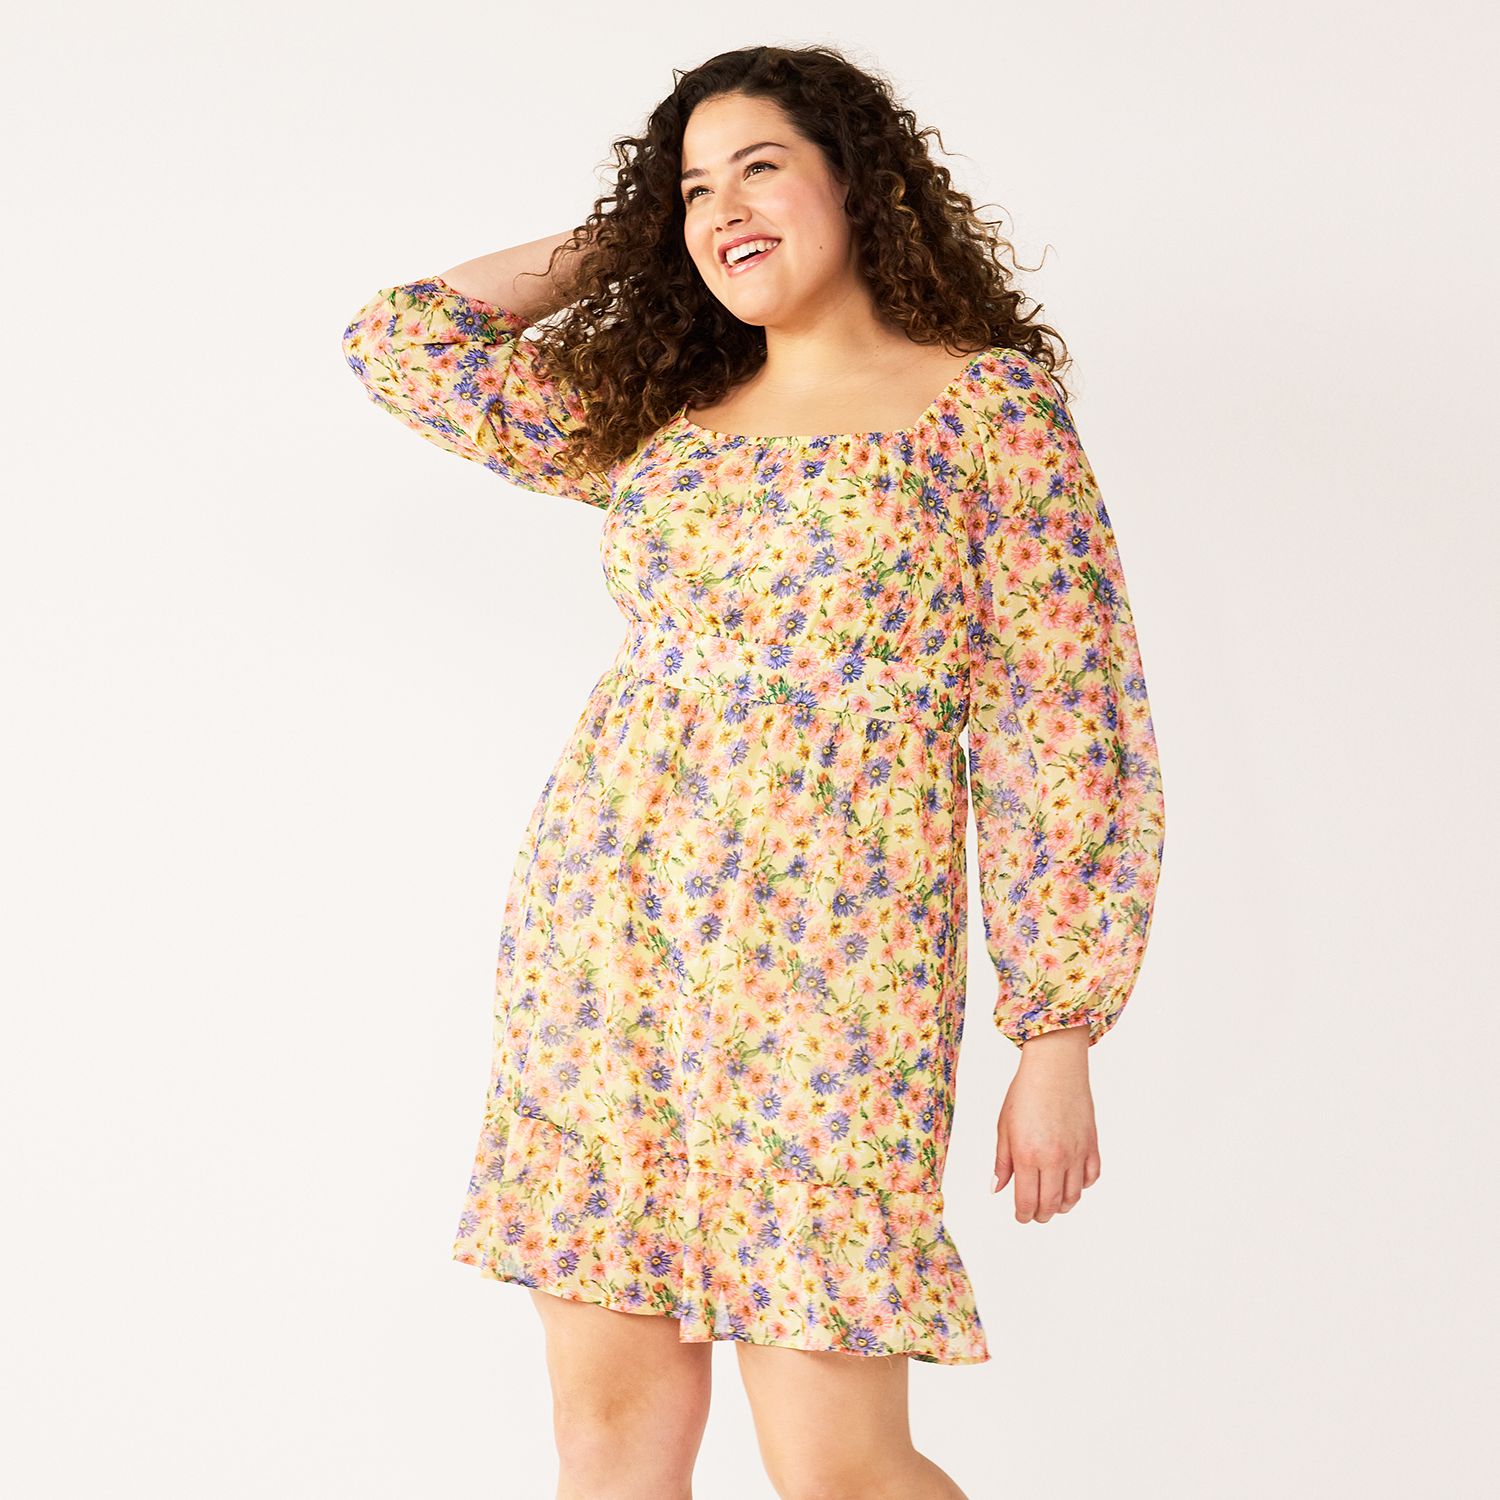 Plus Size Dresses on Clearance | Kohl's